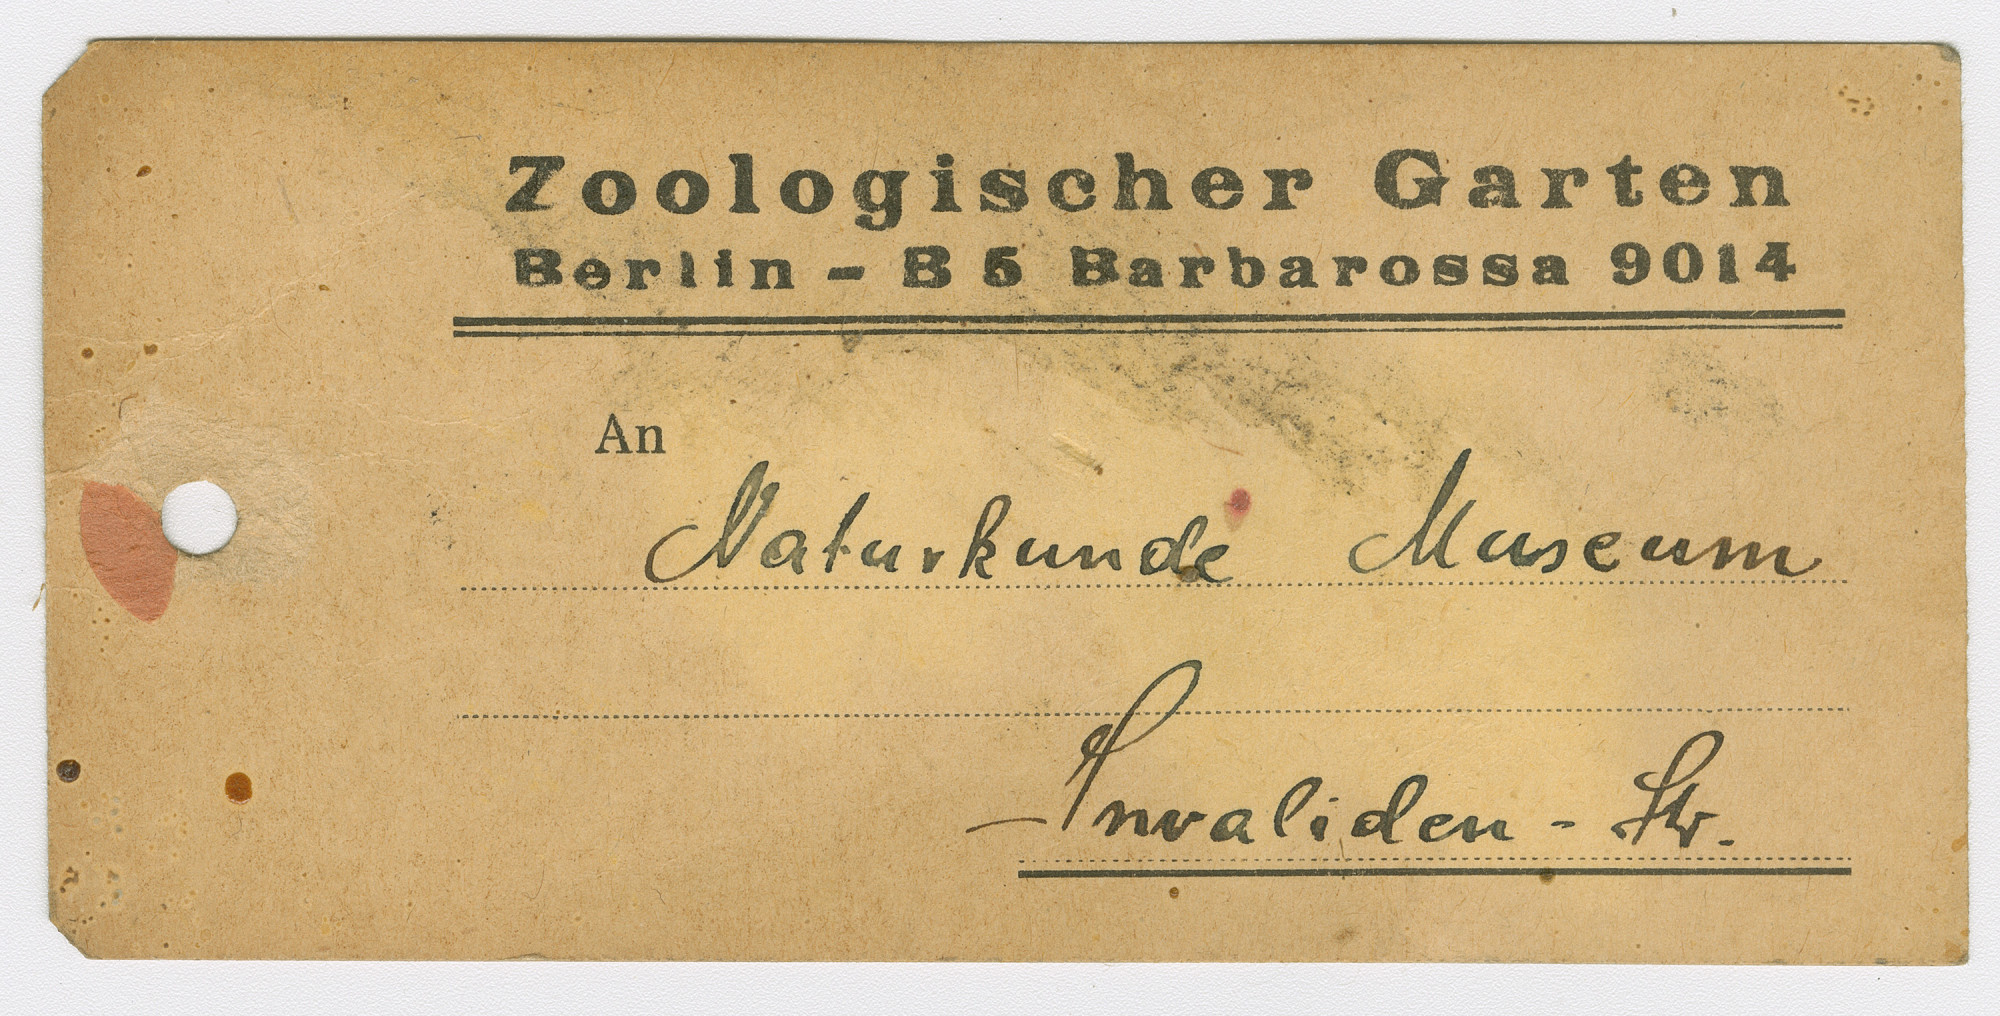 A yellowed, punched paper card with stains and preprinted text at the top: Zoologischer Garten Berlin – B5 Barbarossa 9014 / To. Handwritten: Natural History Museum / Invaliden-Str.